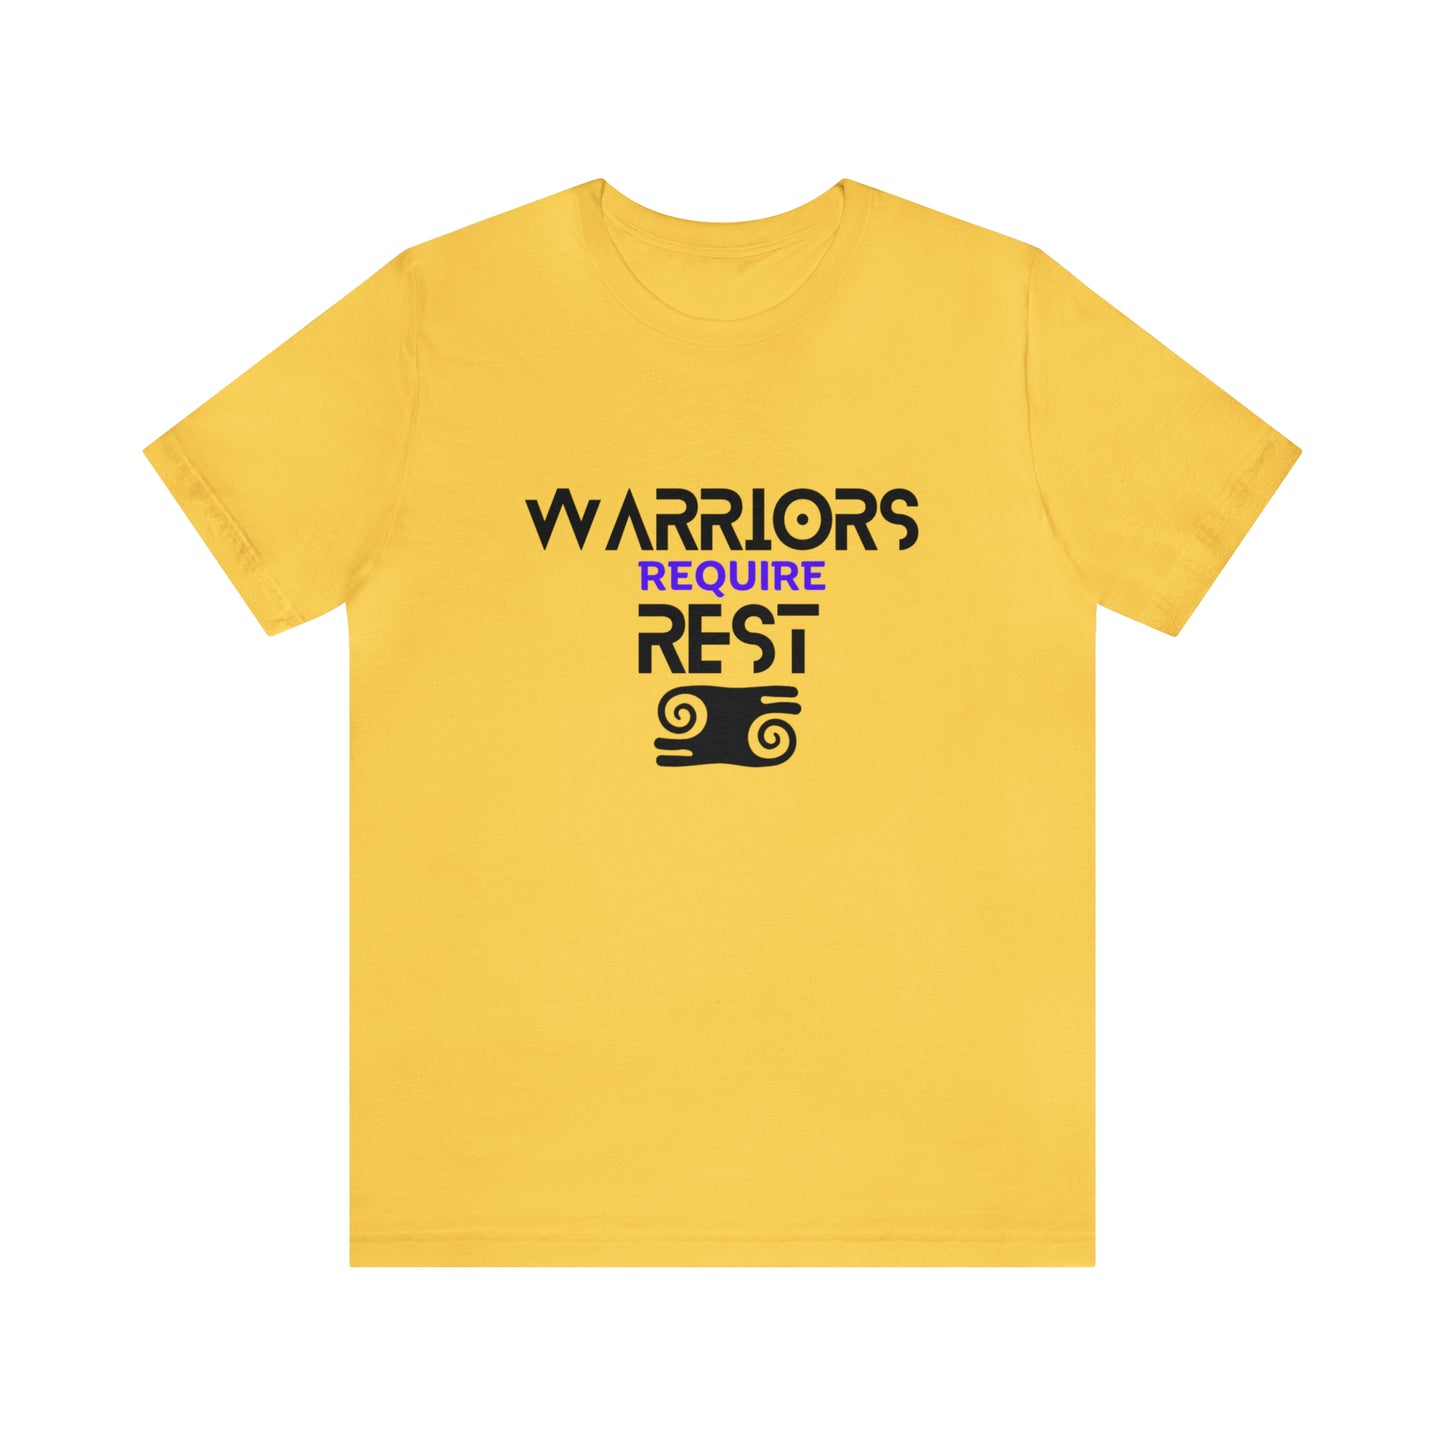 The Rested Warrior™